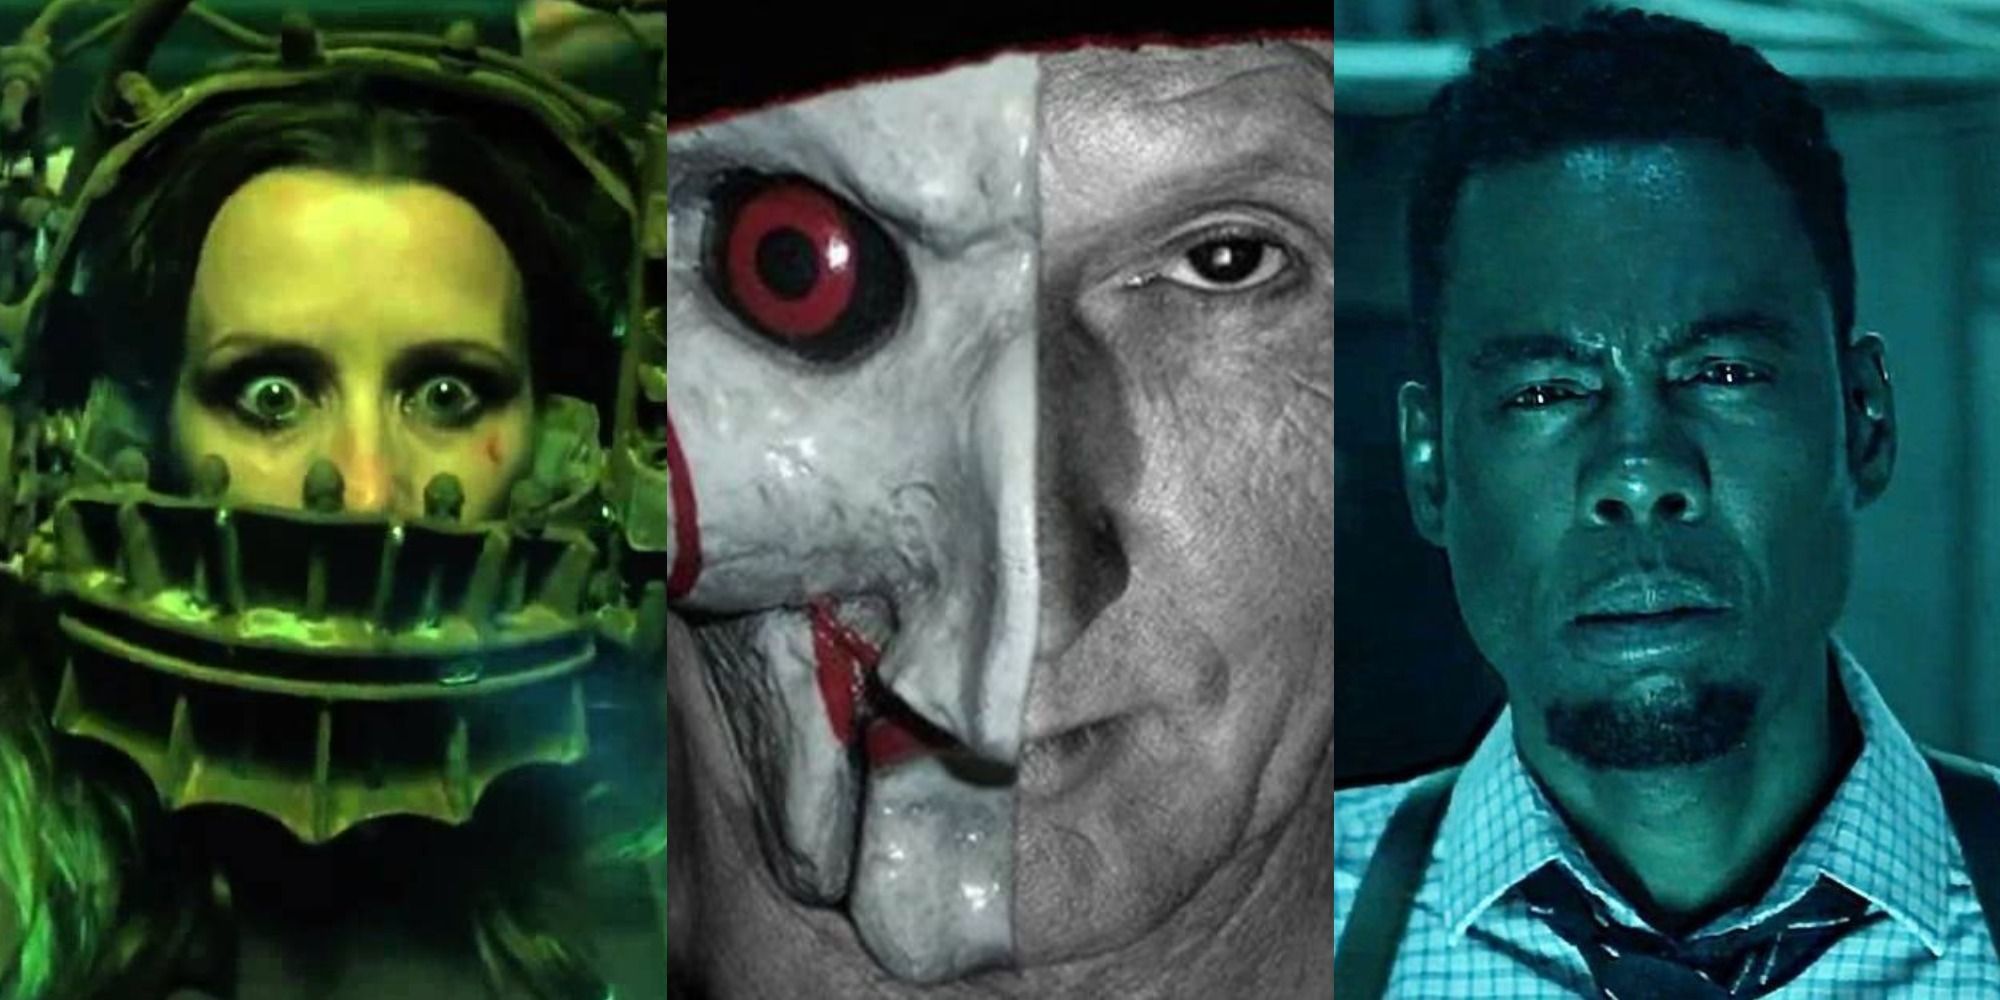 Brilliant Saw Theory Connects 1 Character To Another Controversial Horror Franchise